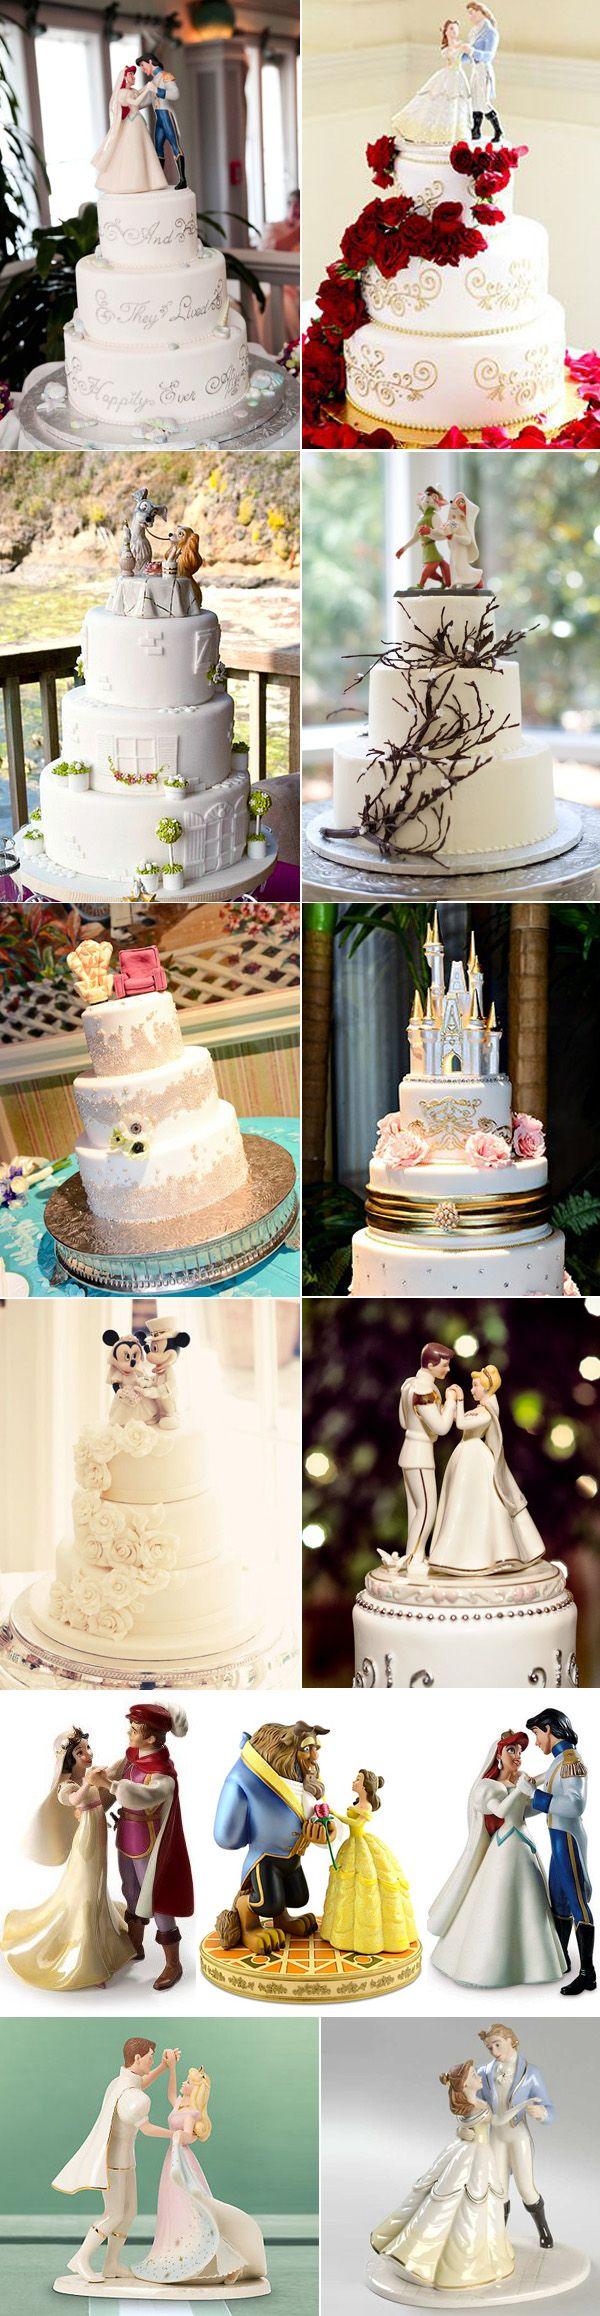 Wedding - 39 Unique & Funny Wedding Cake Toppers